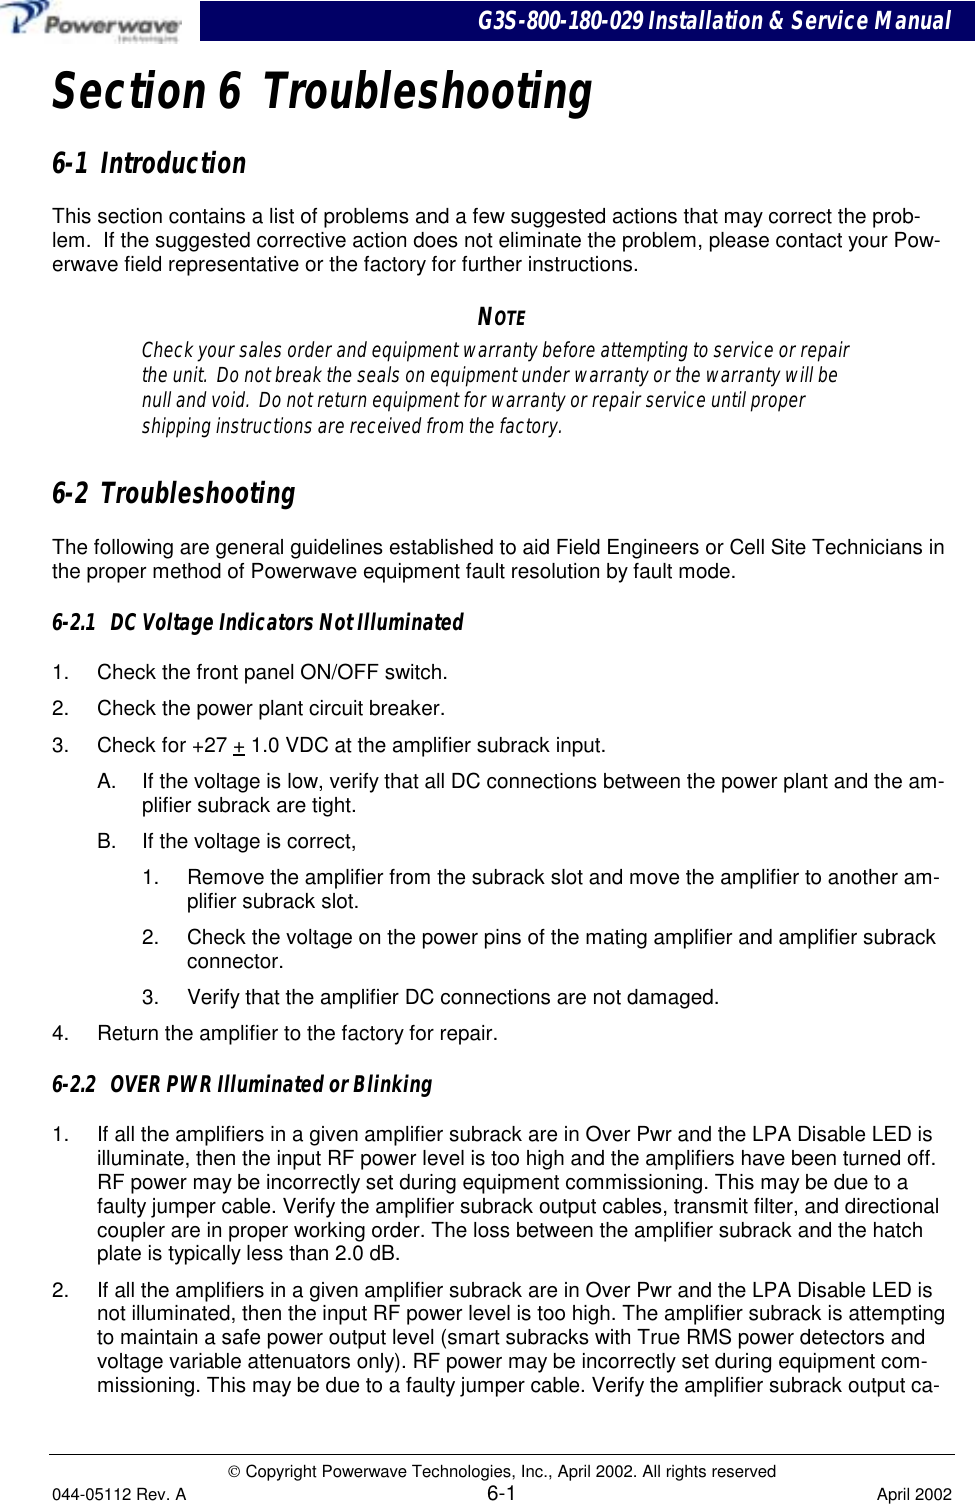 G3S-800-180-029 Installation &amp; Service Manual Copyright Powerwave Technologies, Inc., April 2002. All rights reserved044-05112 Rev. A 6-1 April 2002Section 6  Troubleshooting6-1  IntroductionThis section contains a list of problems and a few suggested actions that may correct the prob-lem.  If the suggested corrective action does not eliminate the problem, please contact your Pow-erwave field representative or the factory for further instructions.NOTECheck your sales order and equipment warranty before attempting to service or repairthe unit.  Do not break the seals on equipment under warranty or the warranty will benull and void.  Do not return equipment for warranty or repair service until propershipping instructions are received from the factory.6-2  TroubleshootingThe following are general guidelines established to aid Field Engineers or Cell Site Technicians inthe proper method of Powerwave equipment fault resolution by fault mode.6-2.1   DC Voltage Indicators Not Illuminated1.  Check the front panel ON/OFF switch.2.  Check the power plant circuit breaker.3.  Check for +27 + 1.0 VDC at the amplifier subrack input.A.  If the voltage is low, verify that all DC connections between the power plant and the am-plifier subrack are tight.B.  If the voltage is correct,1.  Remove the amplifier from the subrack slot and move the amplifier to another am-plifier subrack slot.2.  Check the voltage on the power pins of the mating amplifier and amplifier subrackconnector.3.  Verify that the amplifier DC connections are not damaged.4.  Return the amplifier to the factory for repair.6-2.2   OVER PWR Illuminated or Blinking1.  If all the amplifiers in a given amplifier subrack are in Over Pwr and the LPA Disable LED isilluminate, then the input RF power level is too high and the amplifiers have been turned off.RF power may be incorrectly set during equipment commissioning. This may be due to afaulty jumper cable. Verify the amplifier subrack output cables, transmit filter, and directionalcoupler are in proper working order. The loss between the amplifier subrack and the hatchplate is typically less than 2.0 dB.2.  If all the amplifiers in a given amplifier subrack are in Over Pwr and the LPA Disable LED isnot illuminated, then the input RF power level is too high. The amplifier subrack is attemptingto maintain a safe power output level (smart subracks with True RMS power detectors andvoltage variable attenuators only). RF power may be incorrectly set during equipment com-missioning. This may be due to a faulty jumper cable. Verify the amplifier subrack output ca-